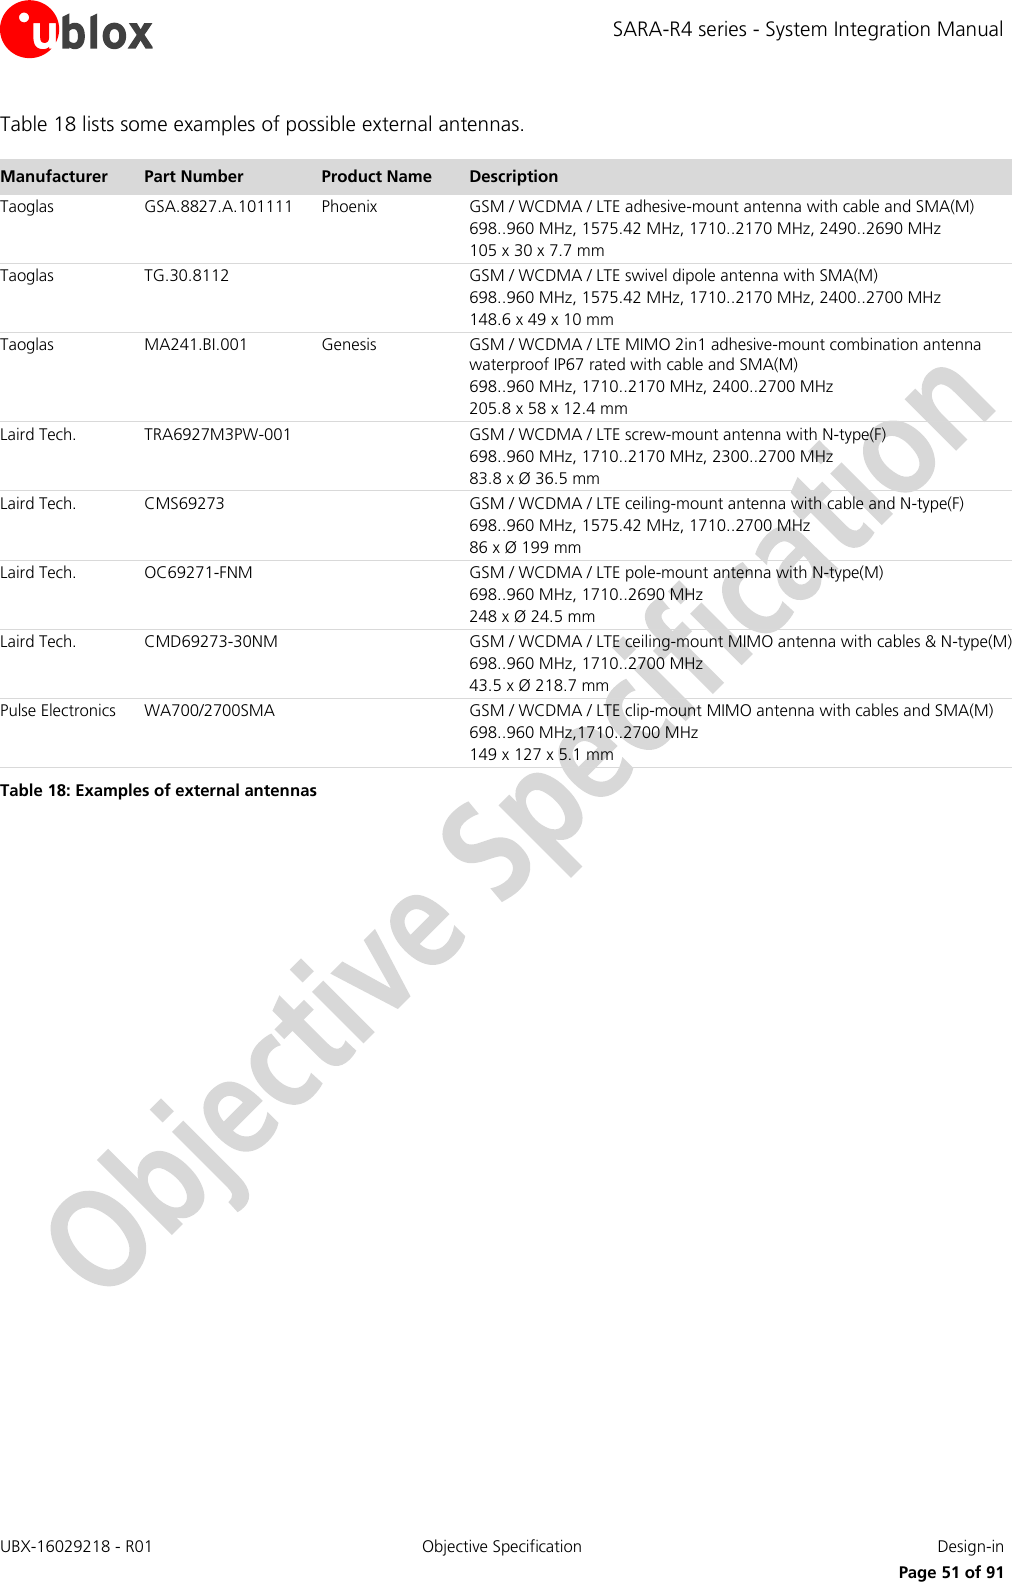 SARA-R4 series - System Integration Manual UBX-16029218 - R01  Objective Specification  Design-in     Page 51 of 91 Table 18 lists some examples of possible external antennas.  Manufacturer Part Number Product Name Description Taoglas GSA.8827.A.101111  Phoenix GSM / WCDMA / LTE adhesive-mount antenna with cable and SMA(M)  698..960 MHz, 1575.42 MHz, 1710..2170 MHz, 2490..2690 MHz 105 x 30 x 7.7 mm Taoglas TG.30.8112  GSM / WCDMA / LTE swivel dipole antenna with SMA(M)  698..960 MHz, 1575.42 MHz, 1710..2170 MHz, 2400..2700 MHz  148.6 x 49 x 10 mm Taoglas MA241.BI.001 Genesis GSM / WCDMA / LTE MIMO 2in1 adhesive-mount combination antenna waterproof IP67 rated with cable and SMA(M) 698..960 MHz, 1710..2170 MHz, 2400..2700 MHz  205.8 x 58 x 12.4 mm Laird Tech. TRA6927M3PW-001  GSM / WCDMA / LTE screw-mount antenna with N-type(F)  698..960 MHz, 1710..2170 MHz, 2300..2700 MHz  83.8 x Ø 36.5 mm Laird Tech. CMS69273  GSM / WCDMA / LTE ceiling-mount antenna with cable and N-type(F)  698..960 MHz, 1575.42 MHz, 1710..2700 MHz  86 x Ø 199 mm Laird Tech. OC69271-FNM  GSM / WCDMA / LTE pole-mount antenna with N-type(M)  698..960 MHz, 1710..2690 MHz 248 x Ø 24.5 mm Laird Tech. CMD69273-30NM  GSM / WCDMA / LTE ceiling-mount MIMO antenna with cables &amp; N-type(M)  698..960 MHz, 1710..2700 MHz  43.5 x Ø 218.7 mm Pulse Electronics WA700/2700SMA  GSM / WCDMA / LTE clip-mount MIMO antenna with cables and SMA(M)  698..960 MHz,1710..2700 MHz 149 x 127 x 5.1 mm Table 18: Examples of external antennas   